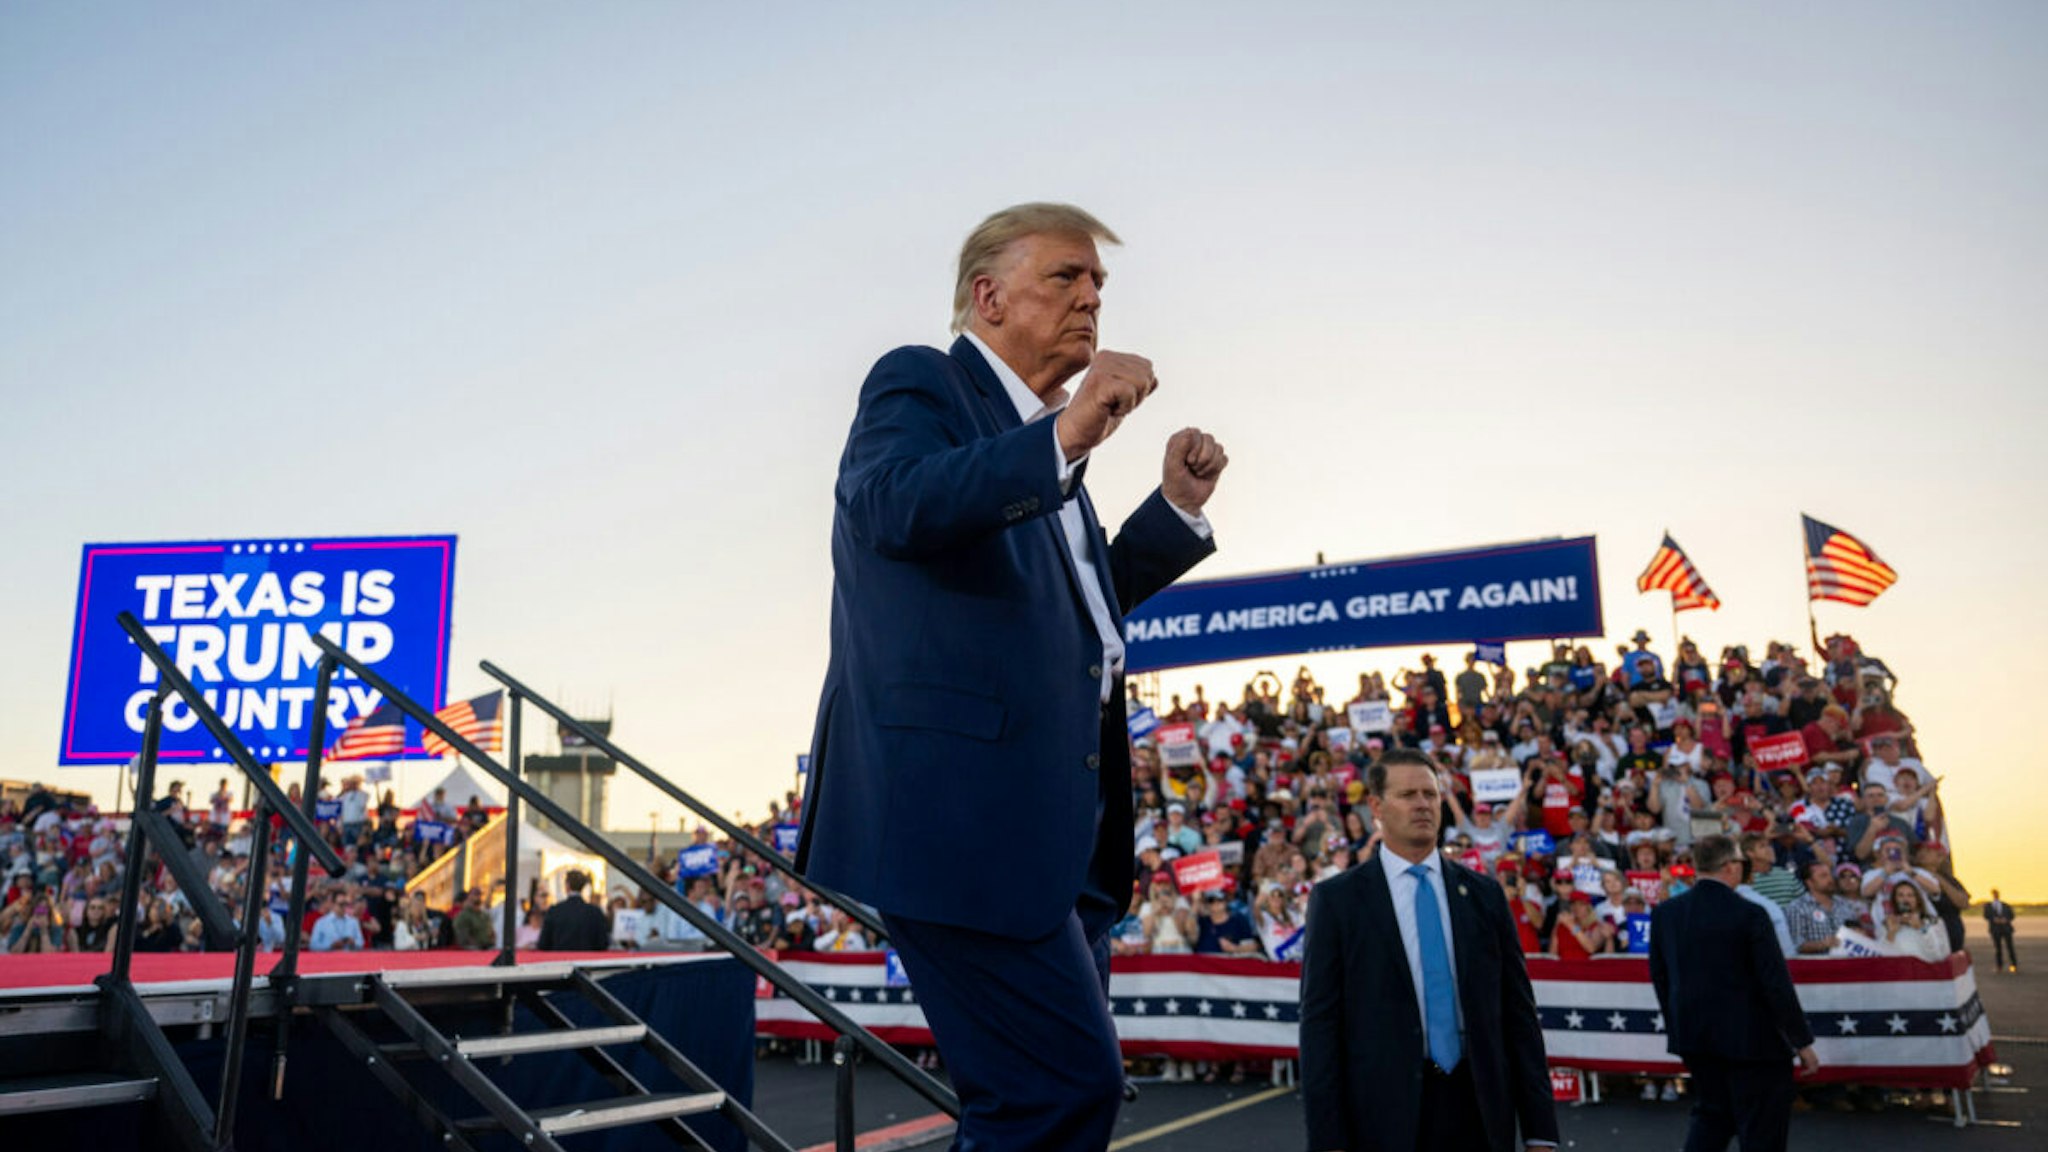 WACO, TEXAS - MARCH 25: Former U.S. President Donald Trump dances while exiting after speaking during a rally at the Waco Regional Airport on March 25, 2023 in Waco, Texas. Former U.S. president Donald Trump attended and spoke at his first rally since announcing his 2024 presidential campaign. Today in Waco also marks the 30-year anniversary of the deadly standoff involving Branch Davidians and federal law enforcement.